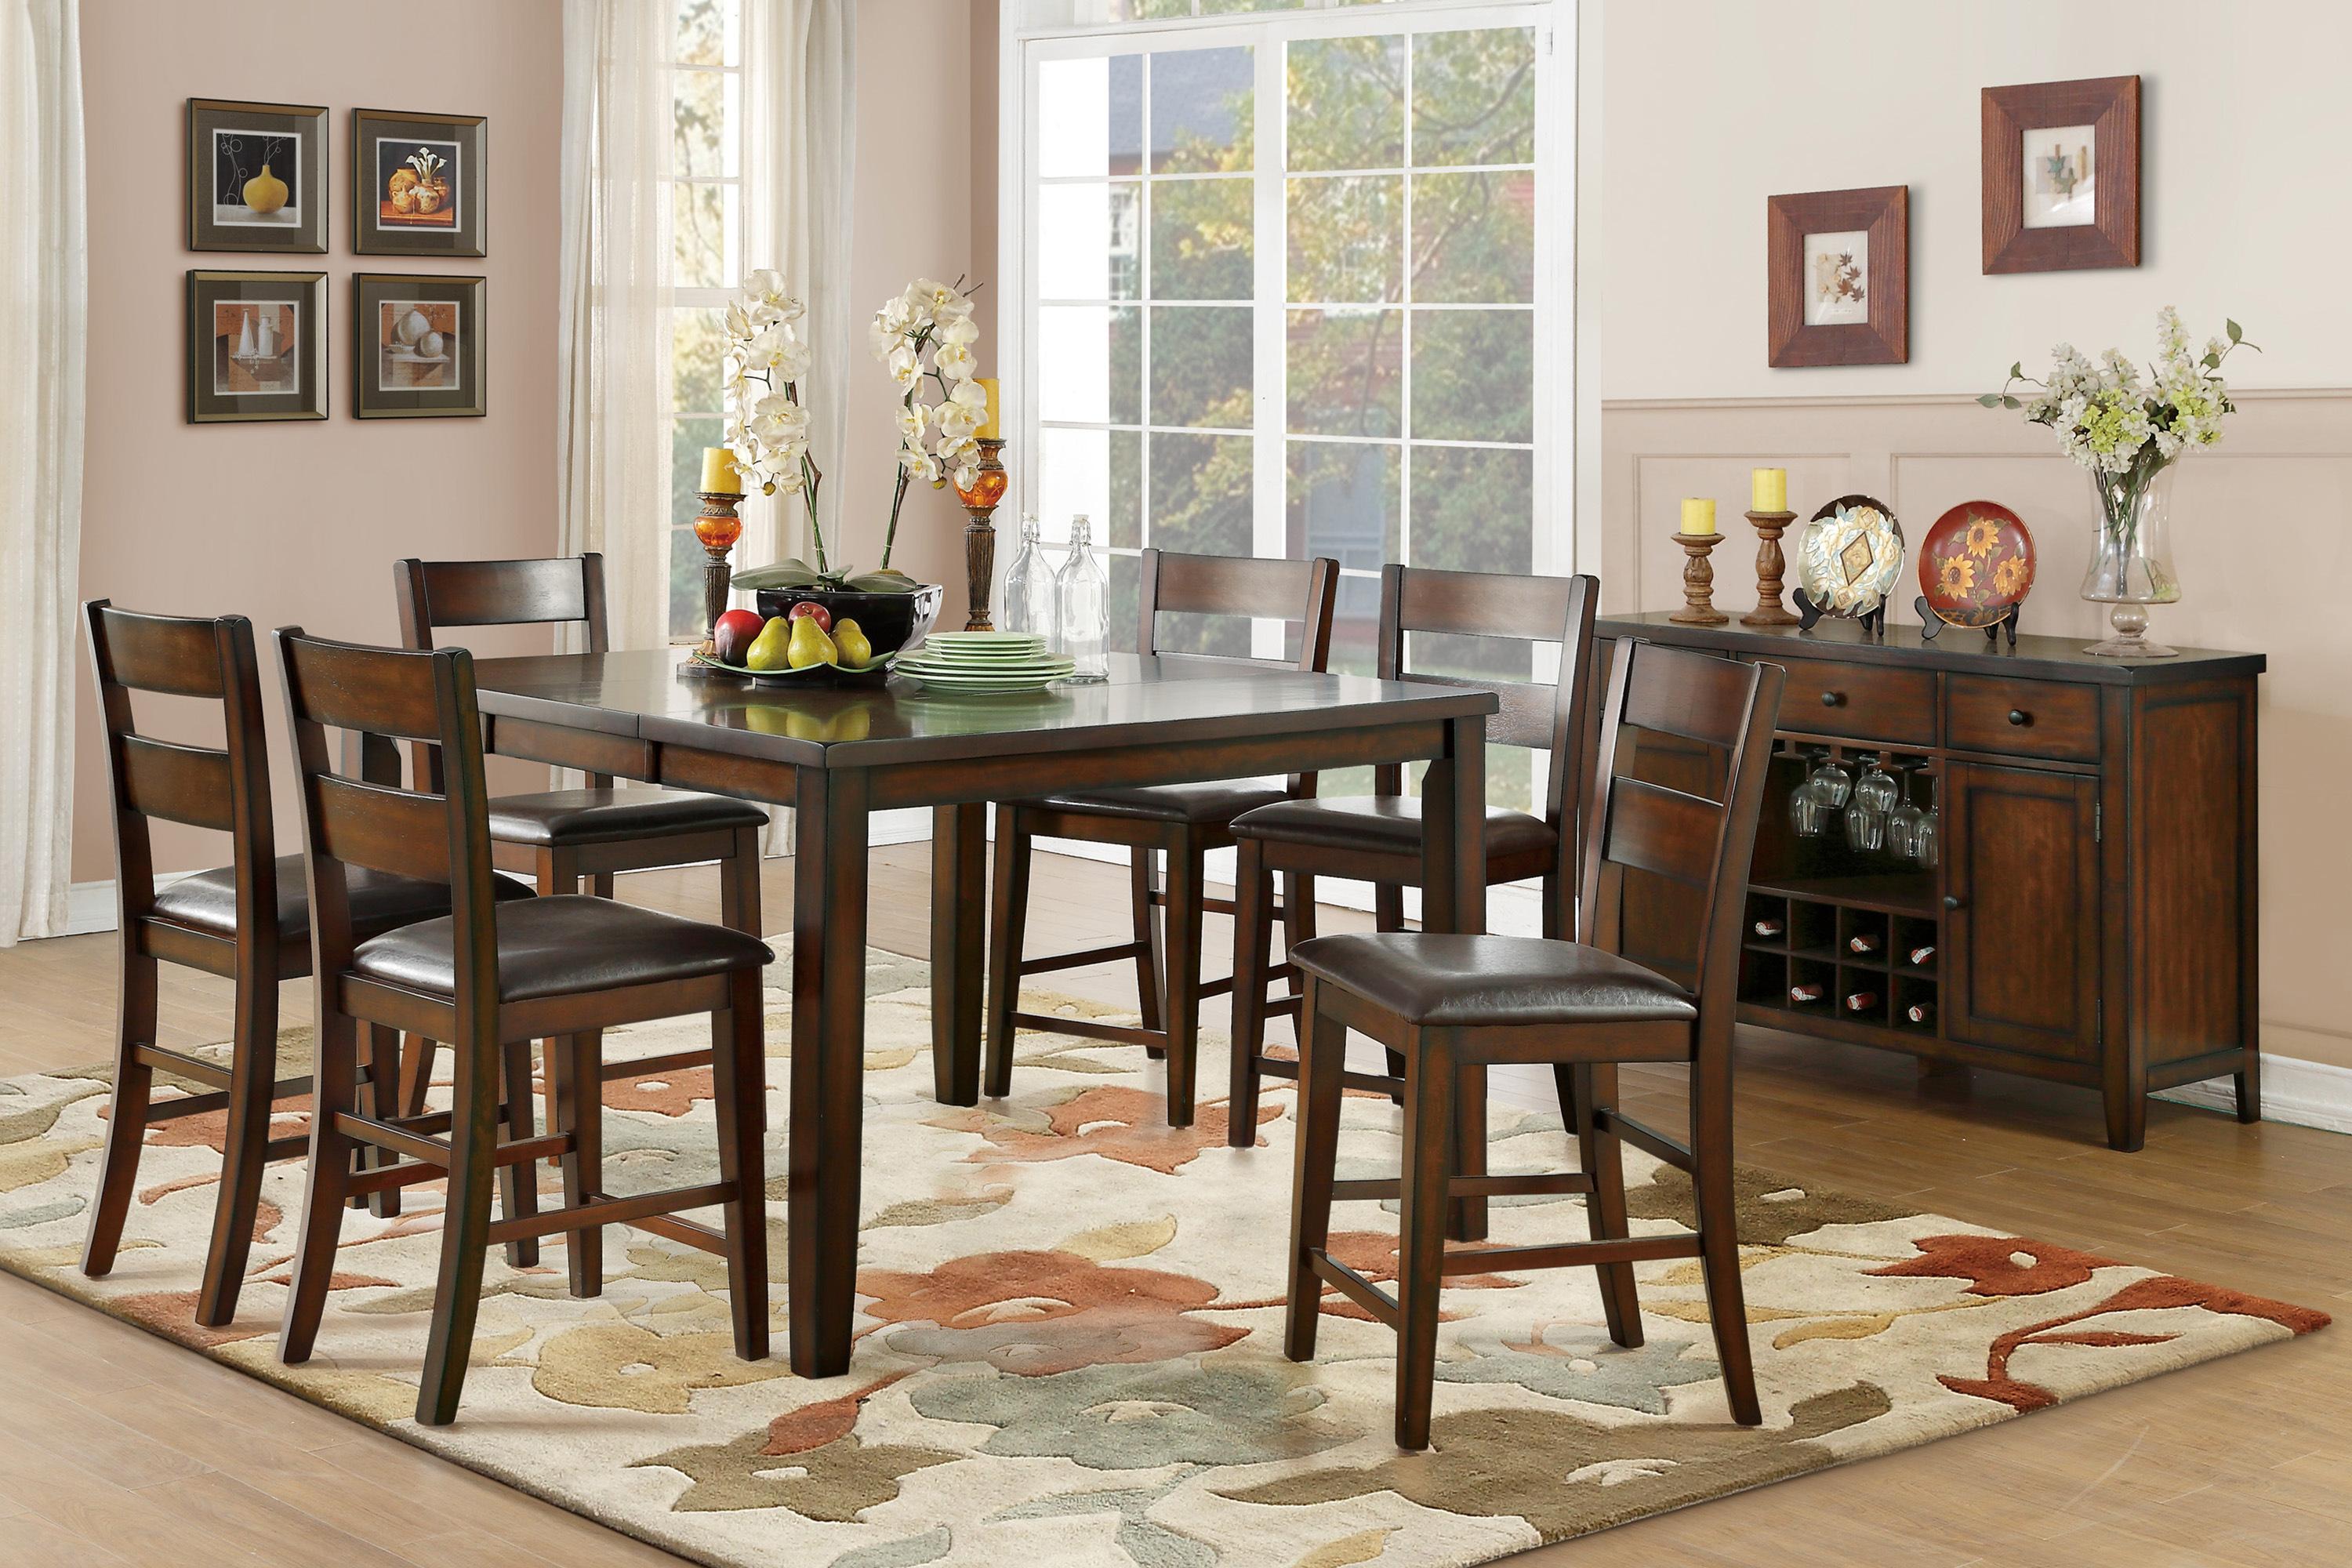 Transitional Dining Room Set 5547-36-8PC Mantello 5547-36-8PC in Cherry Faux Leather